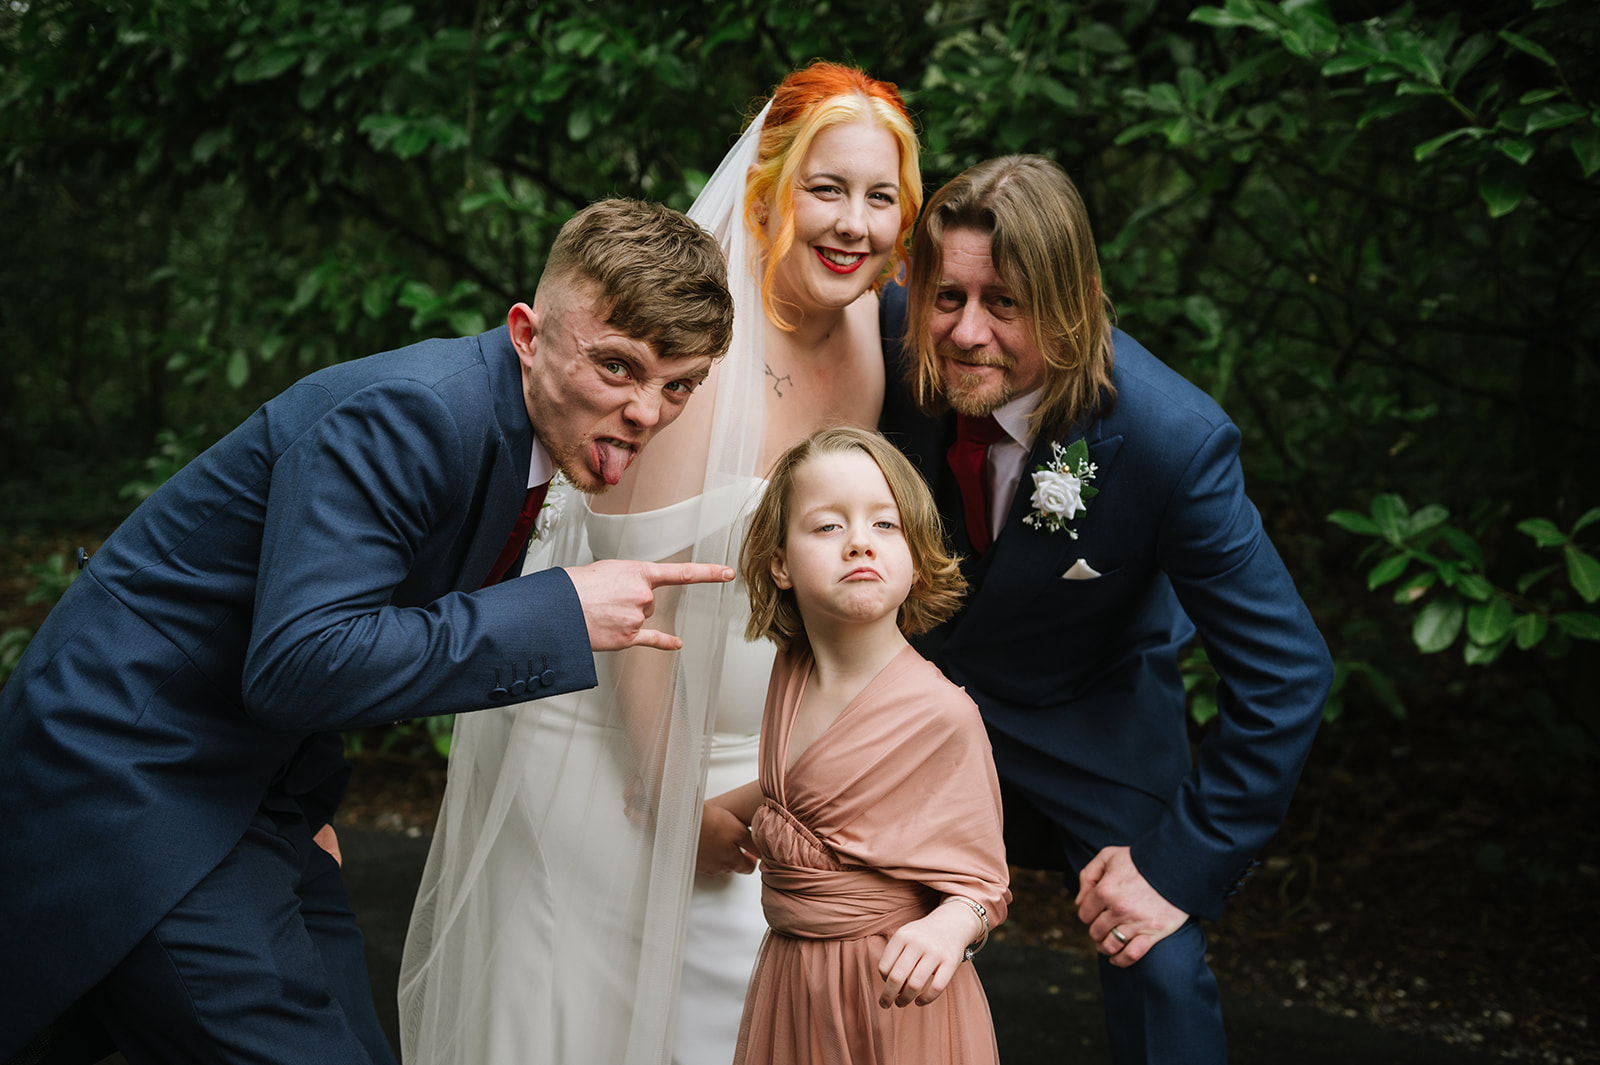 Kerri and Pawl had a full metal wedding at Pendrell Hall in Wolverhampton with their kids, family, friends and bandmates